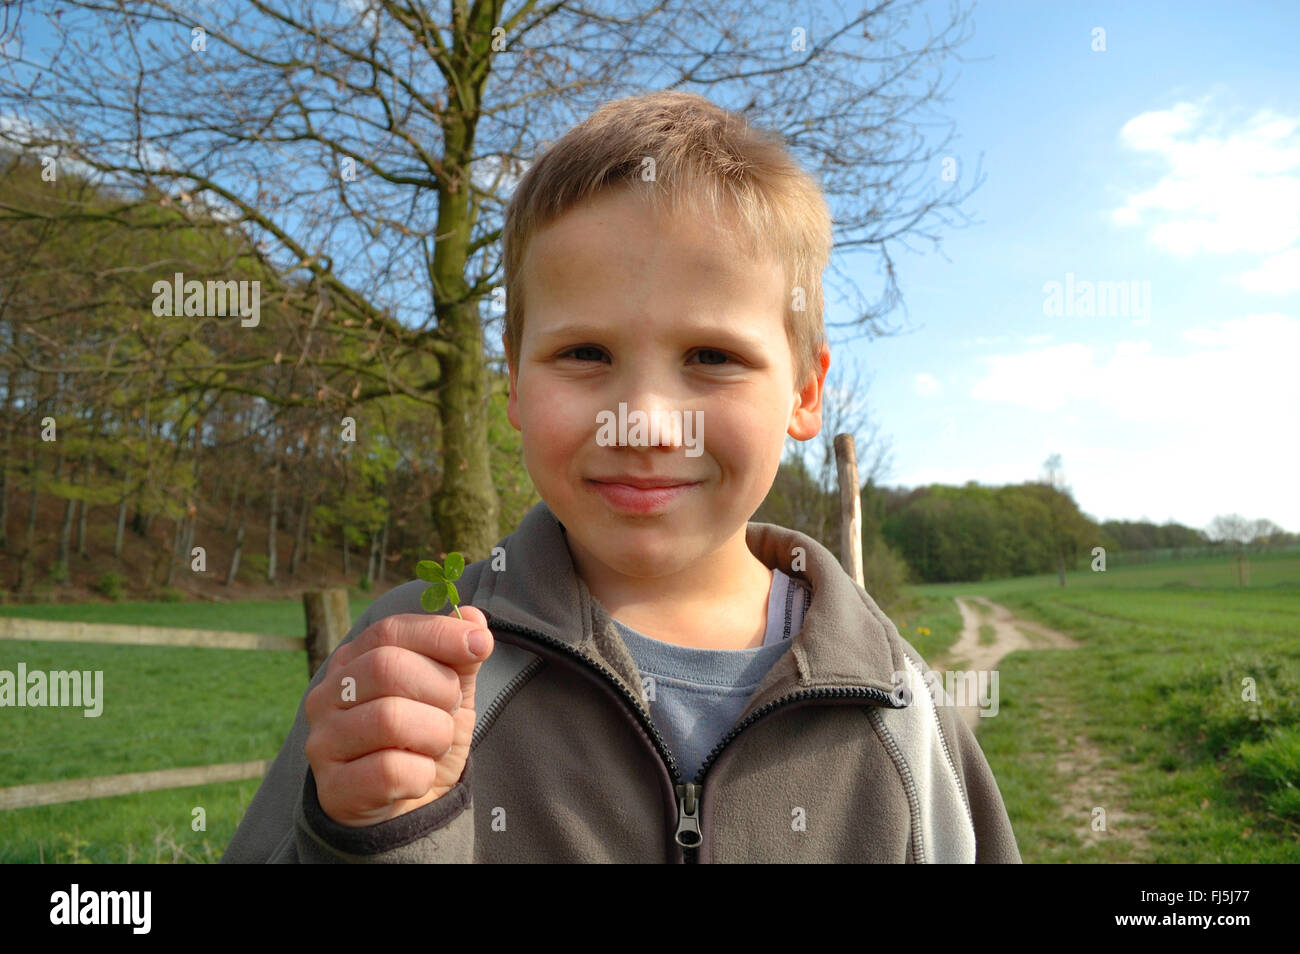 little boy with four-leafed clover in the hand, portrait of a child, Germany Stock Photo